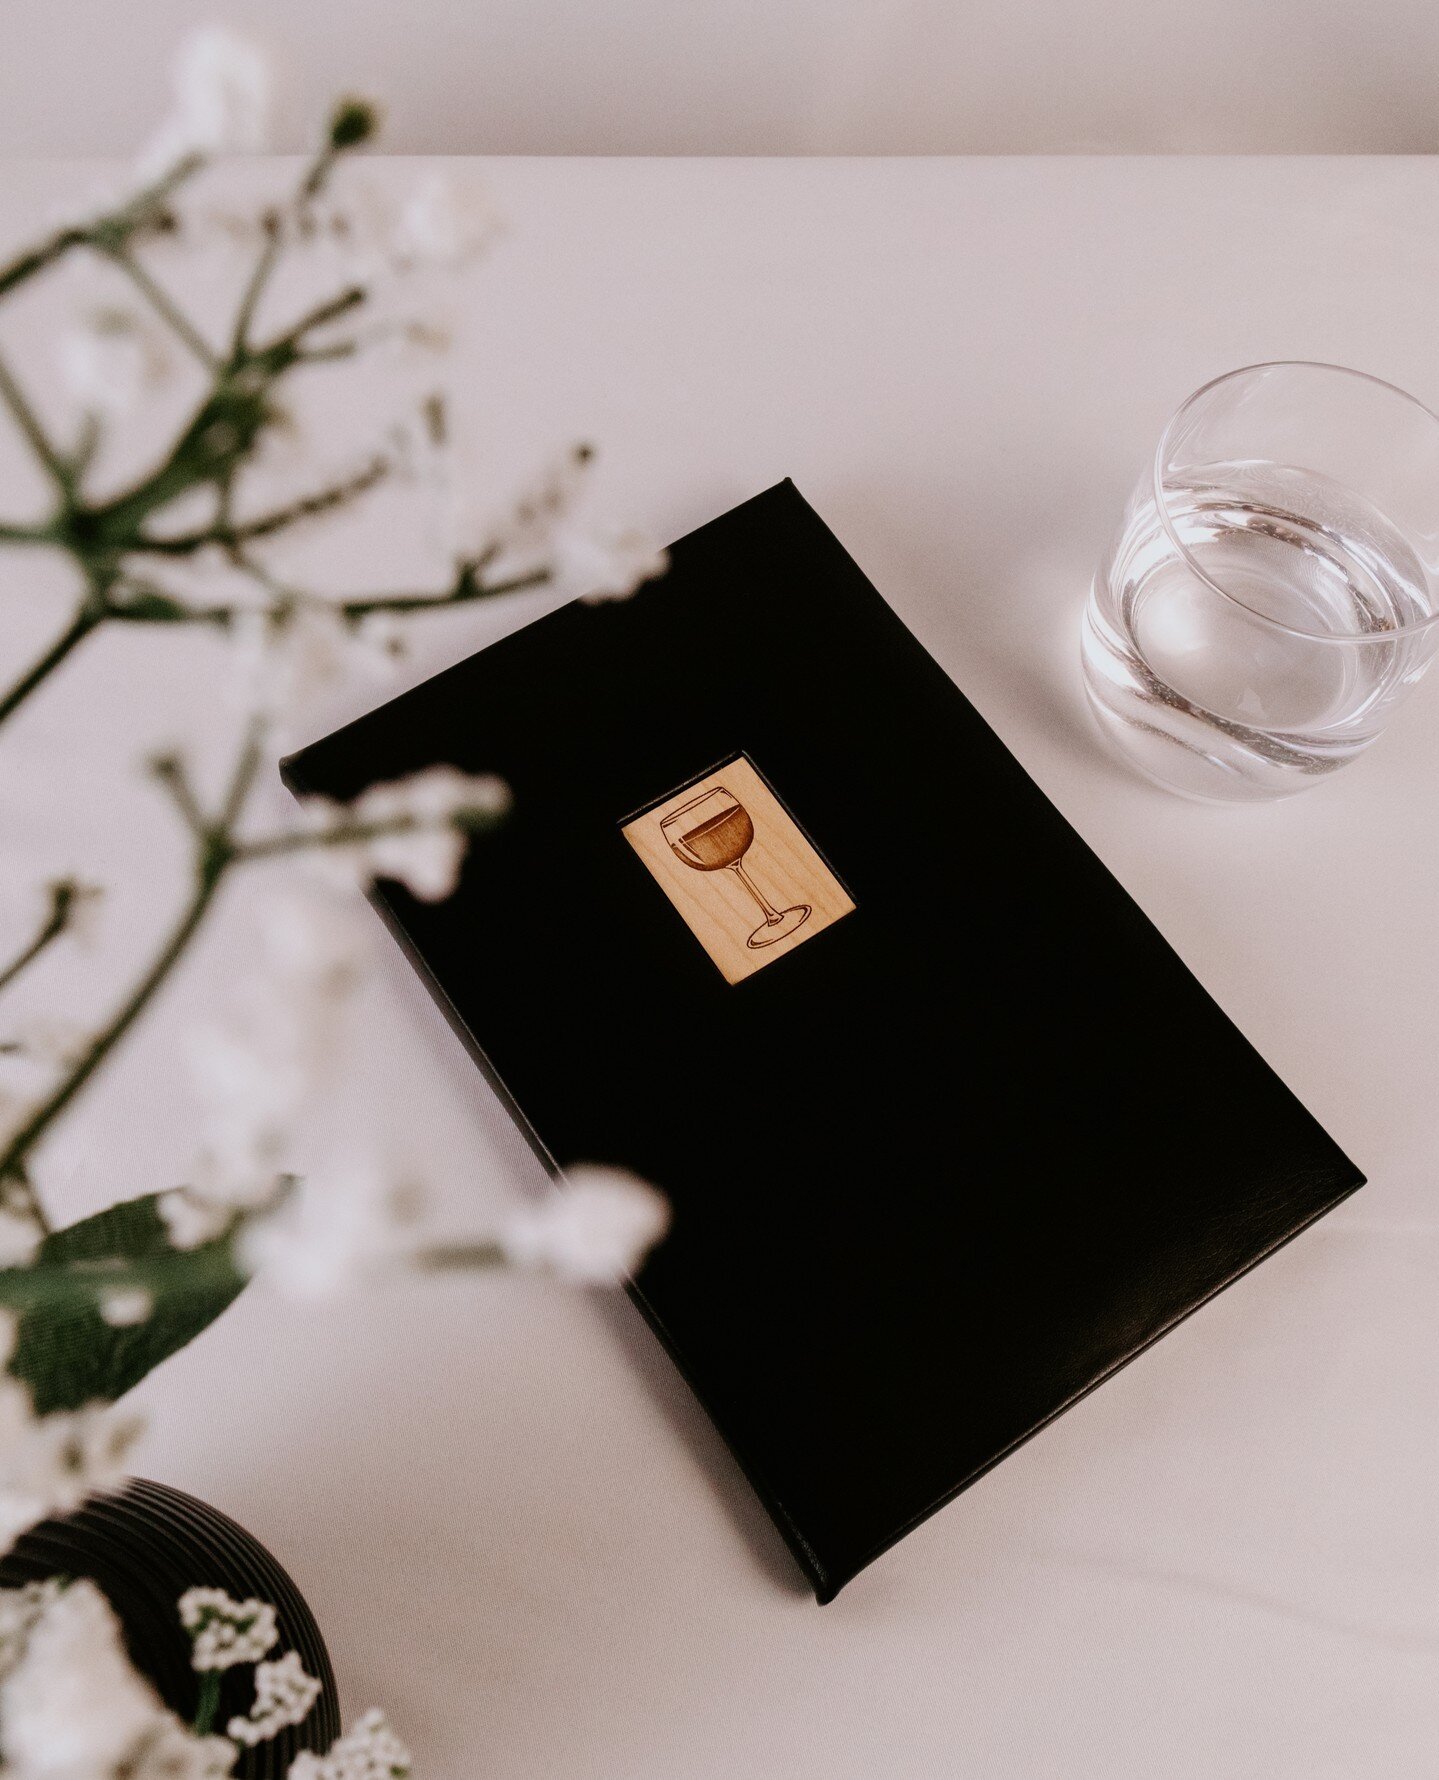 Welcome your customers to a memorable dining experience with a sophisticated selection of drinks from your beverage menu. We use luxurious Black Tamarac material to create two-view menus that feature an authentic maple wood inlay engraved with either